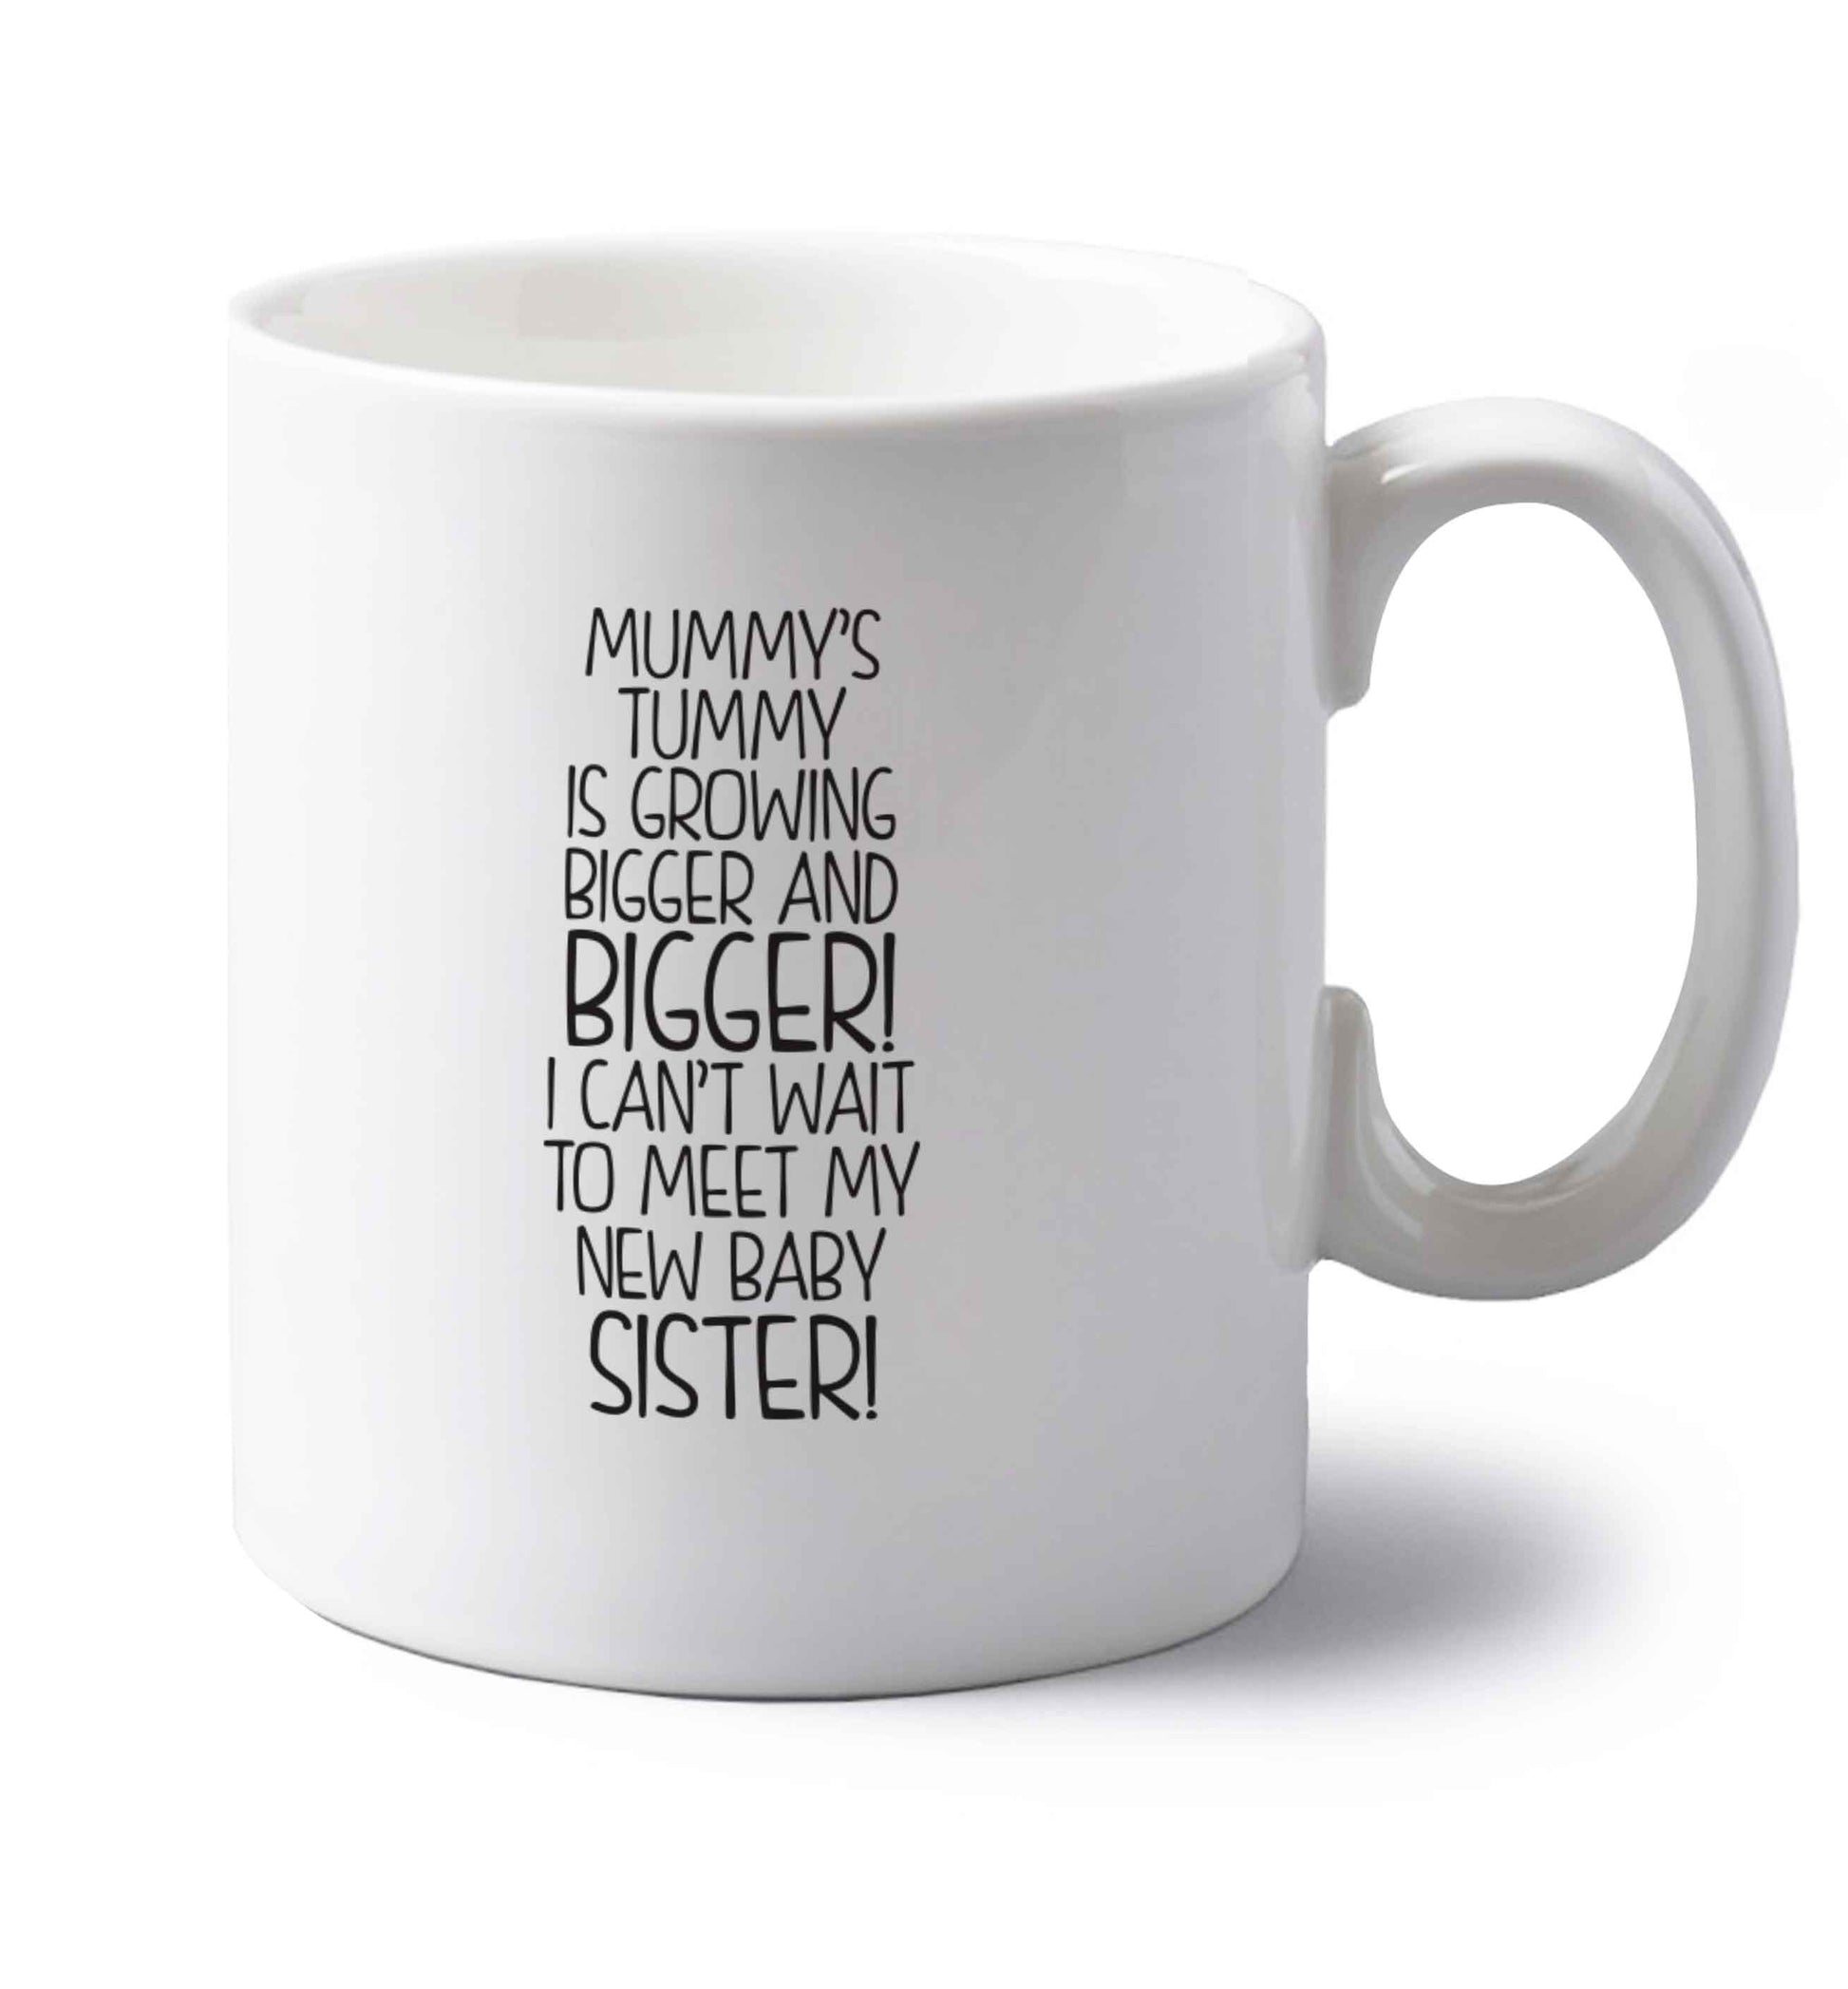 Mummy's tummy is growing bigger and bigger I can't wait to meet my new baby sister! left handed white ceramic mug 